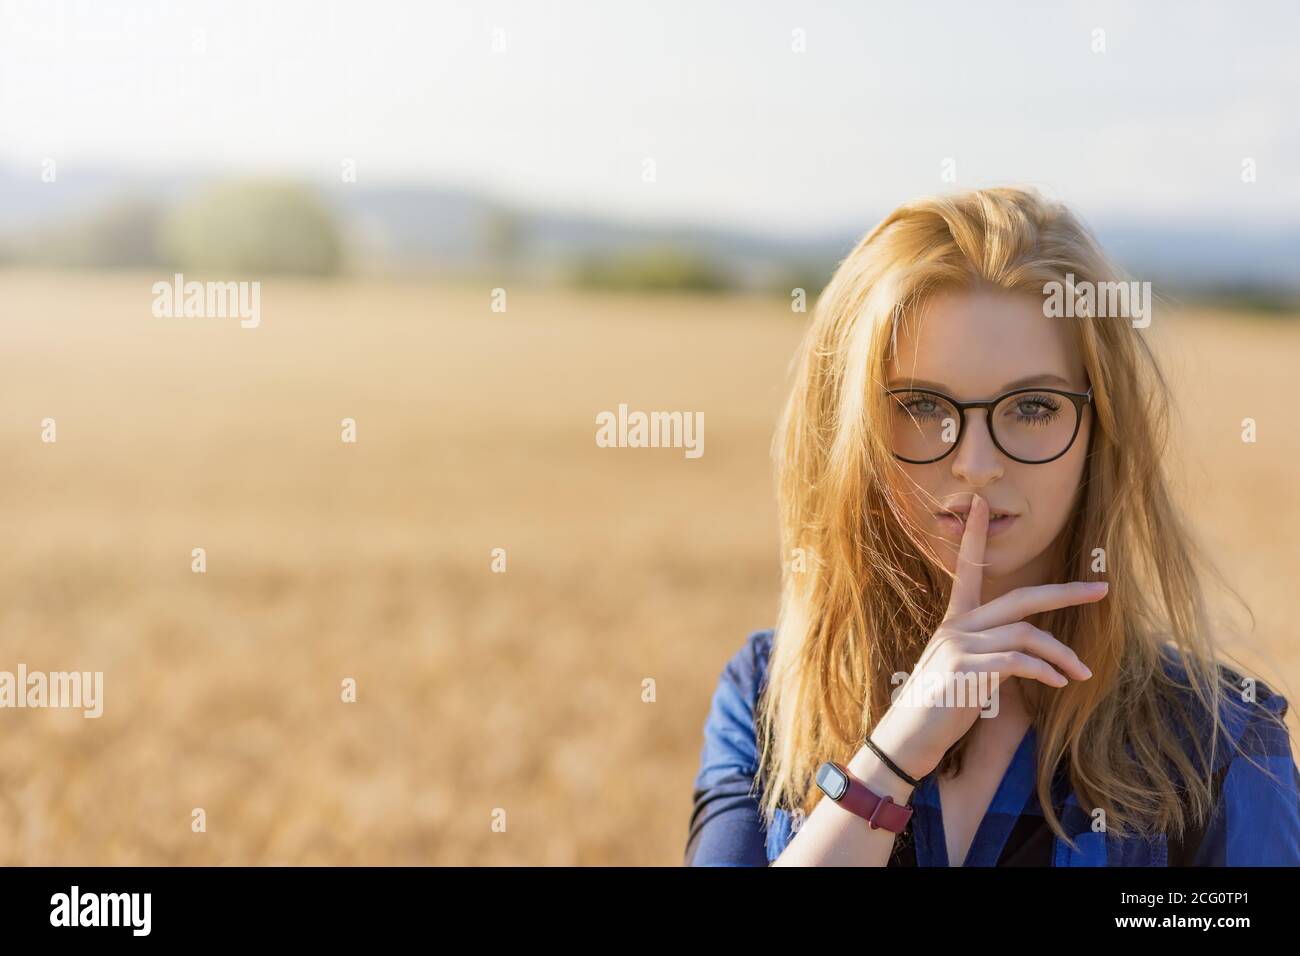 Portrait of young woman wearing glasses and a blue plaid shirt gesturing Shhh in corn field Horizontally. Stock Photo